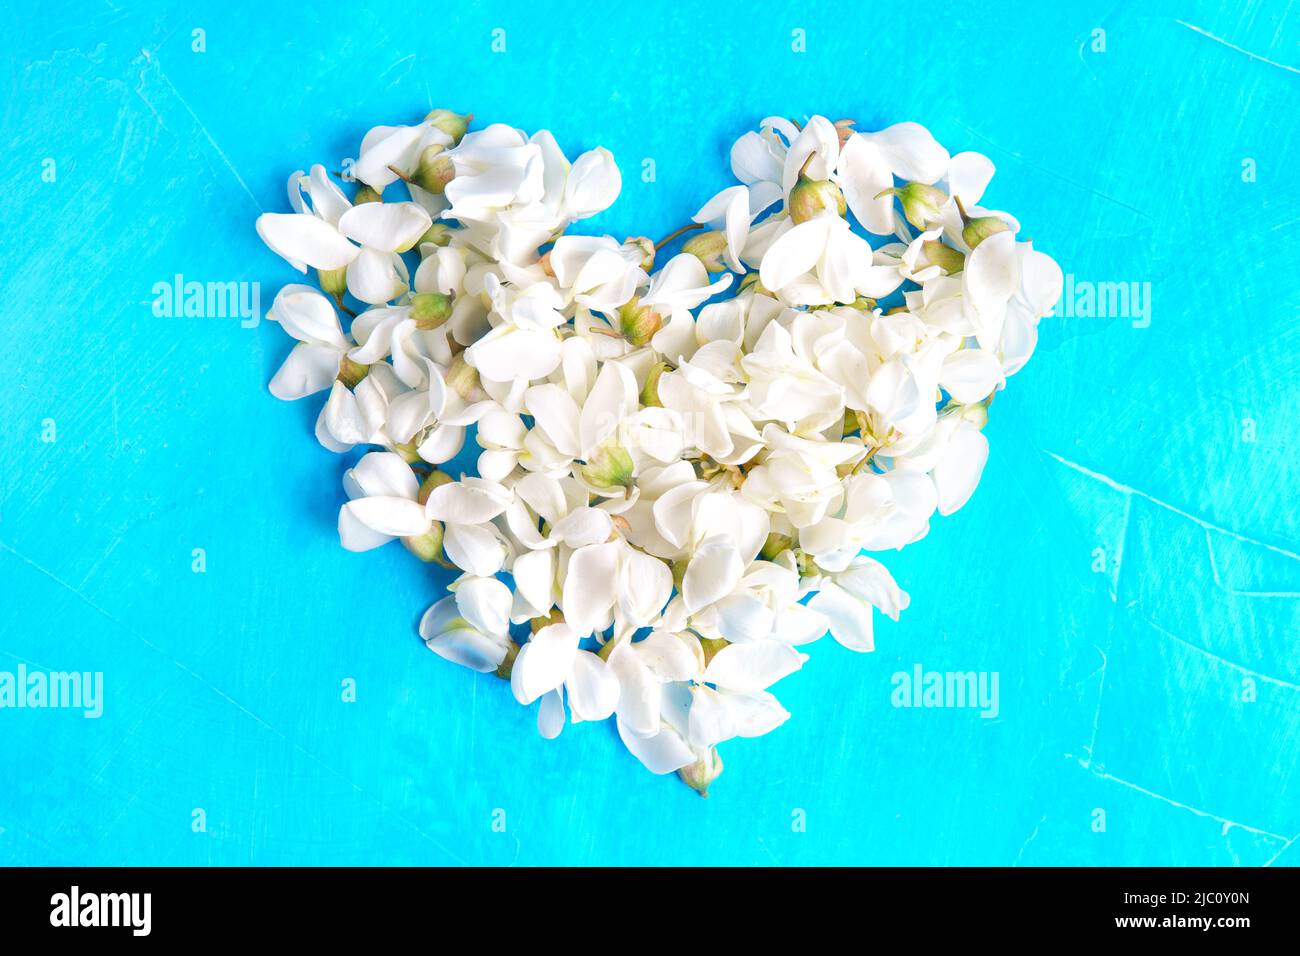 Heat shape made from white acacia flowers on a blue background. Innocence and purity concept. Mother's day card. Stock Photo